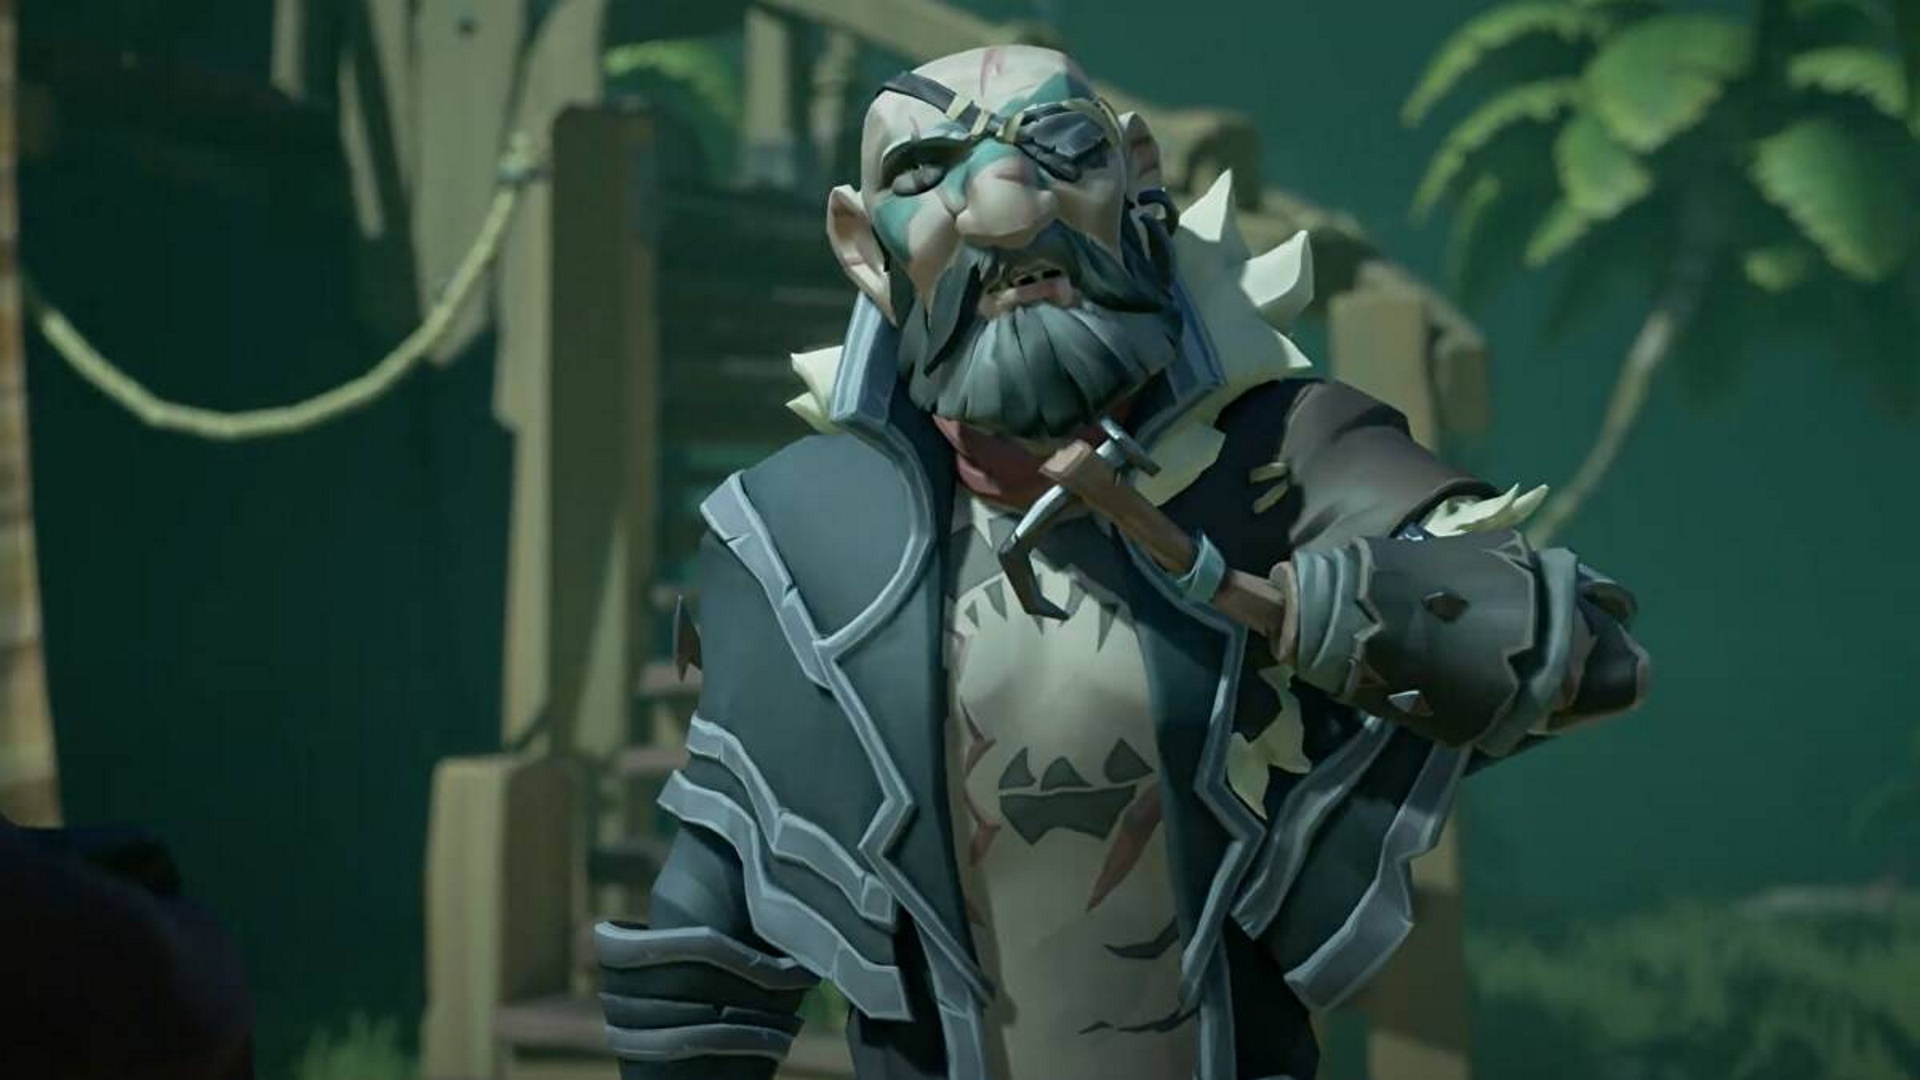 33% of Sea of Thieves players haven't reached the sea